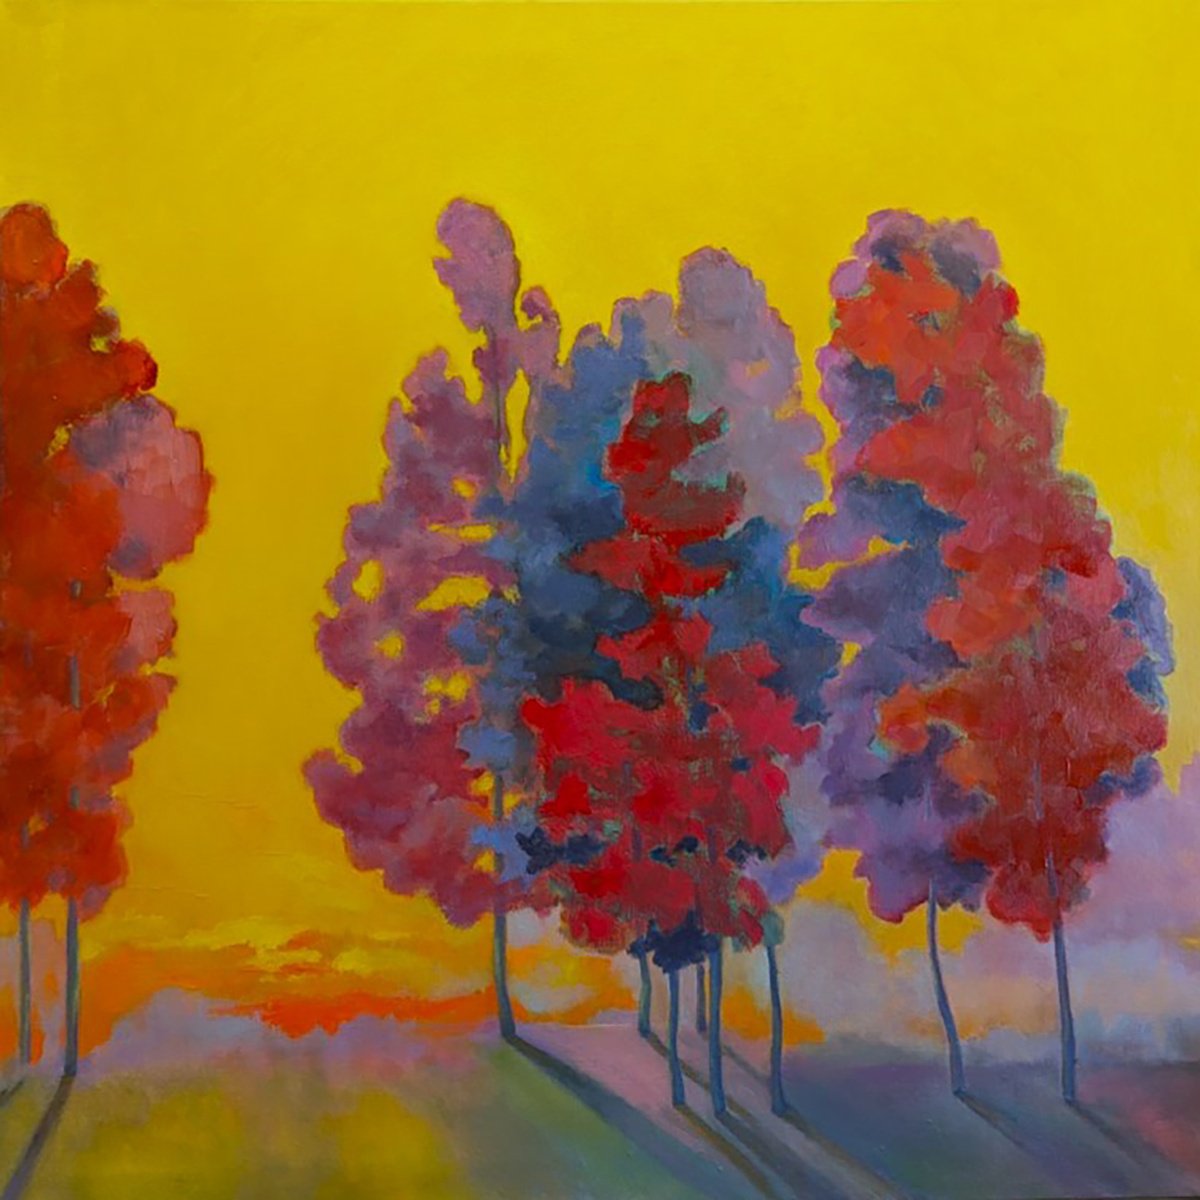 Warm Sunset with Trees. by Veta Barker